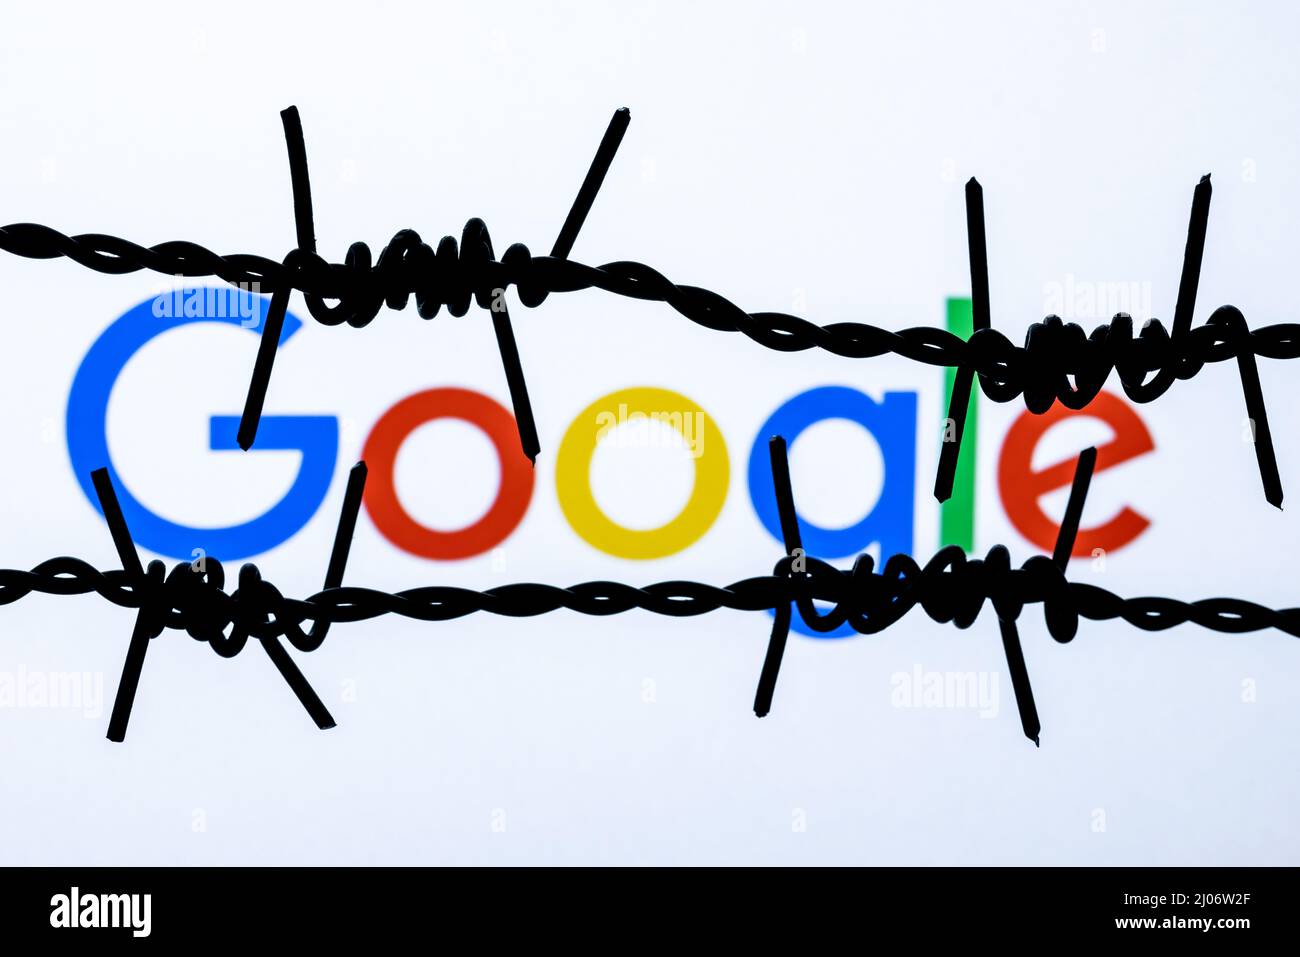 Google technology company logo behind barbed wire. The concept of Google censorship and prohibition. Stock Photo